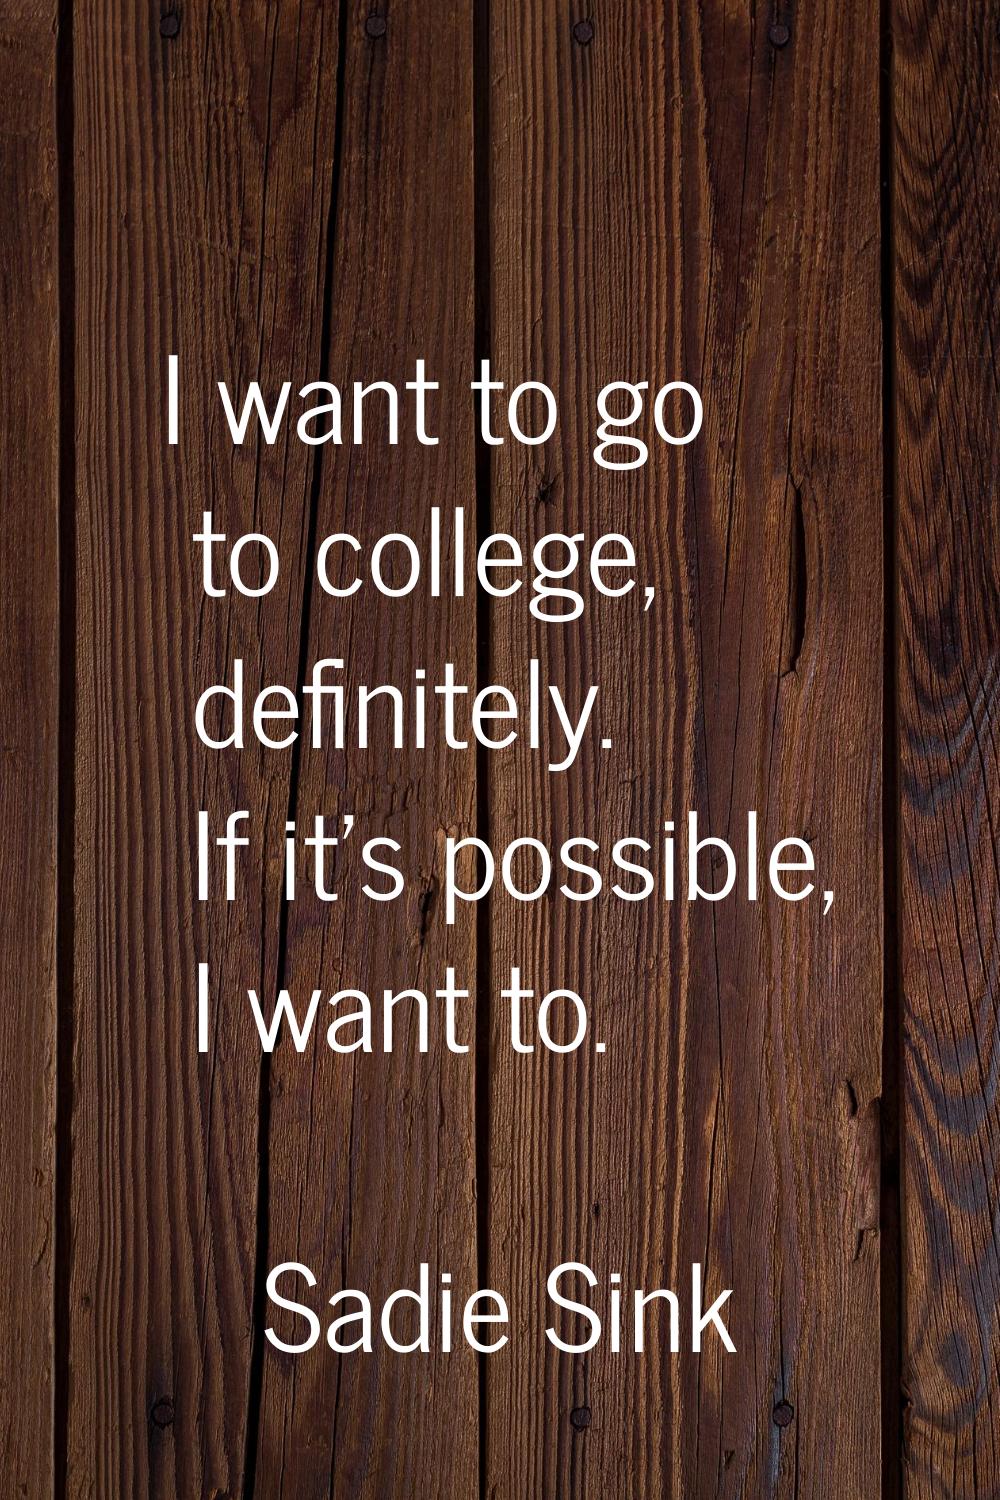 I want to go to college, definitely. If it's possible, I want to.